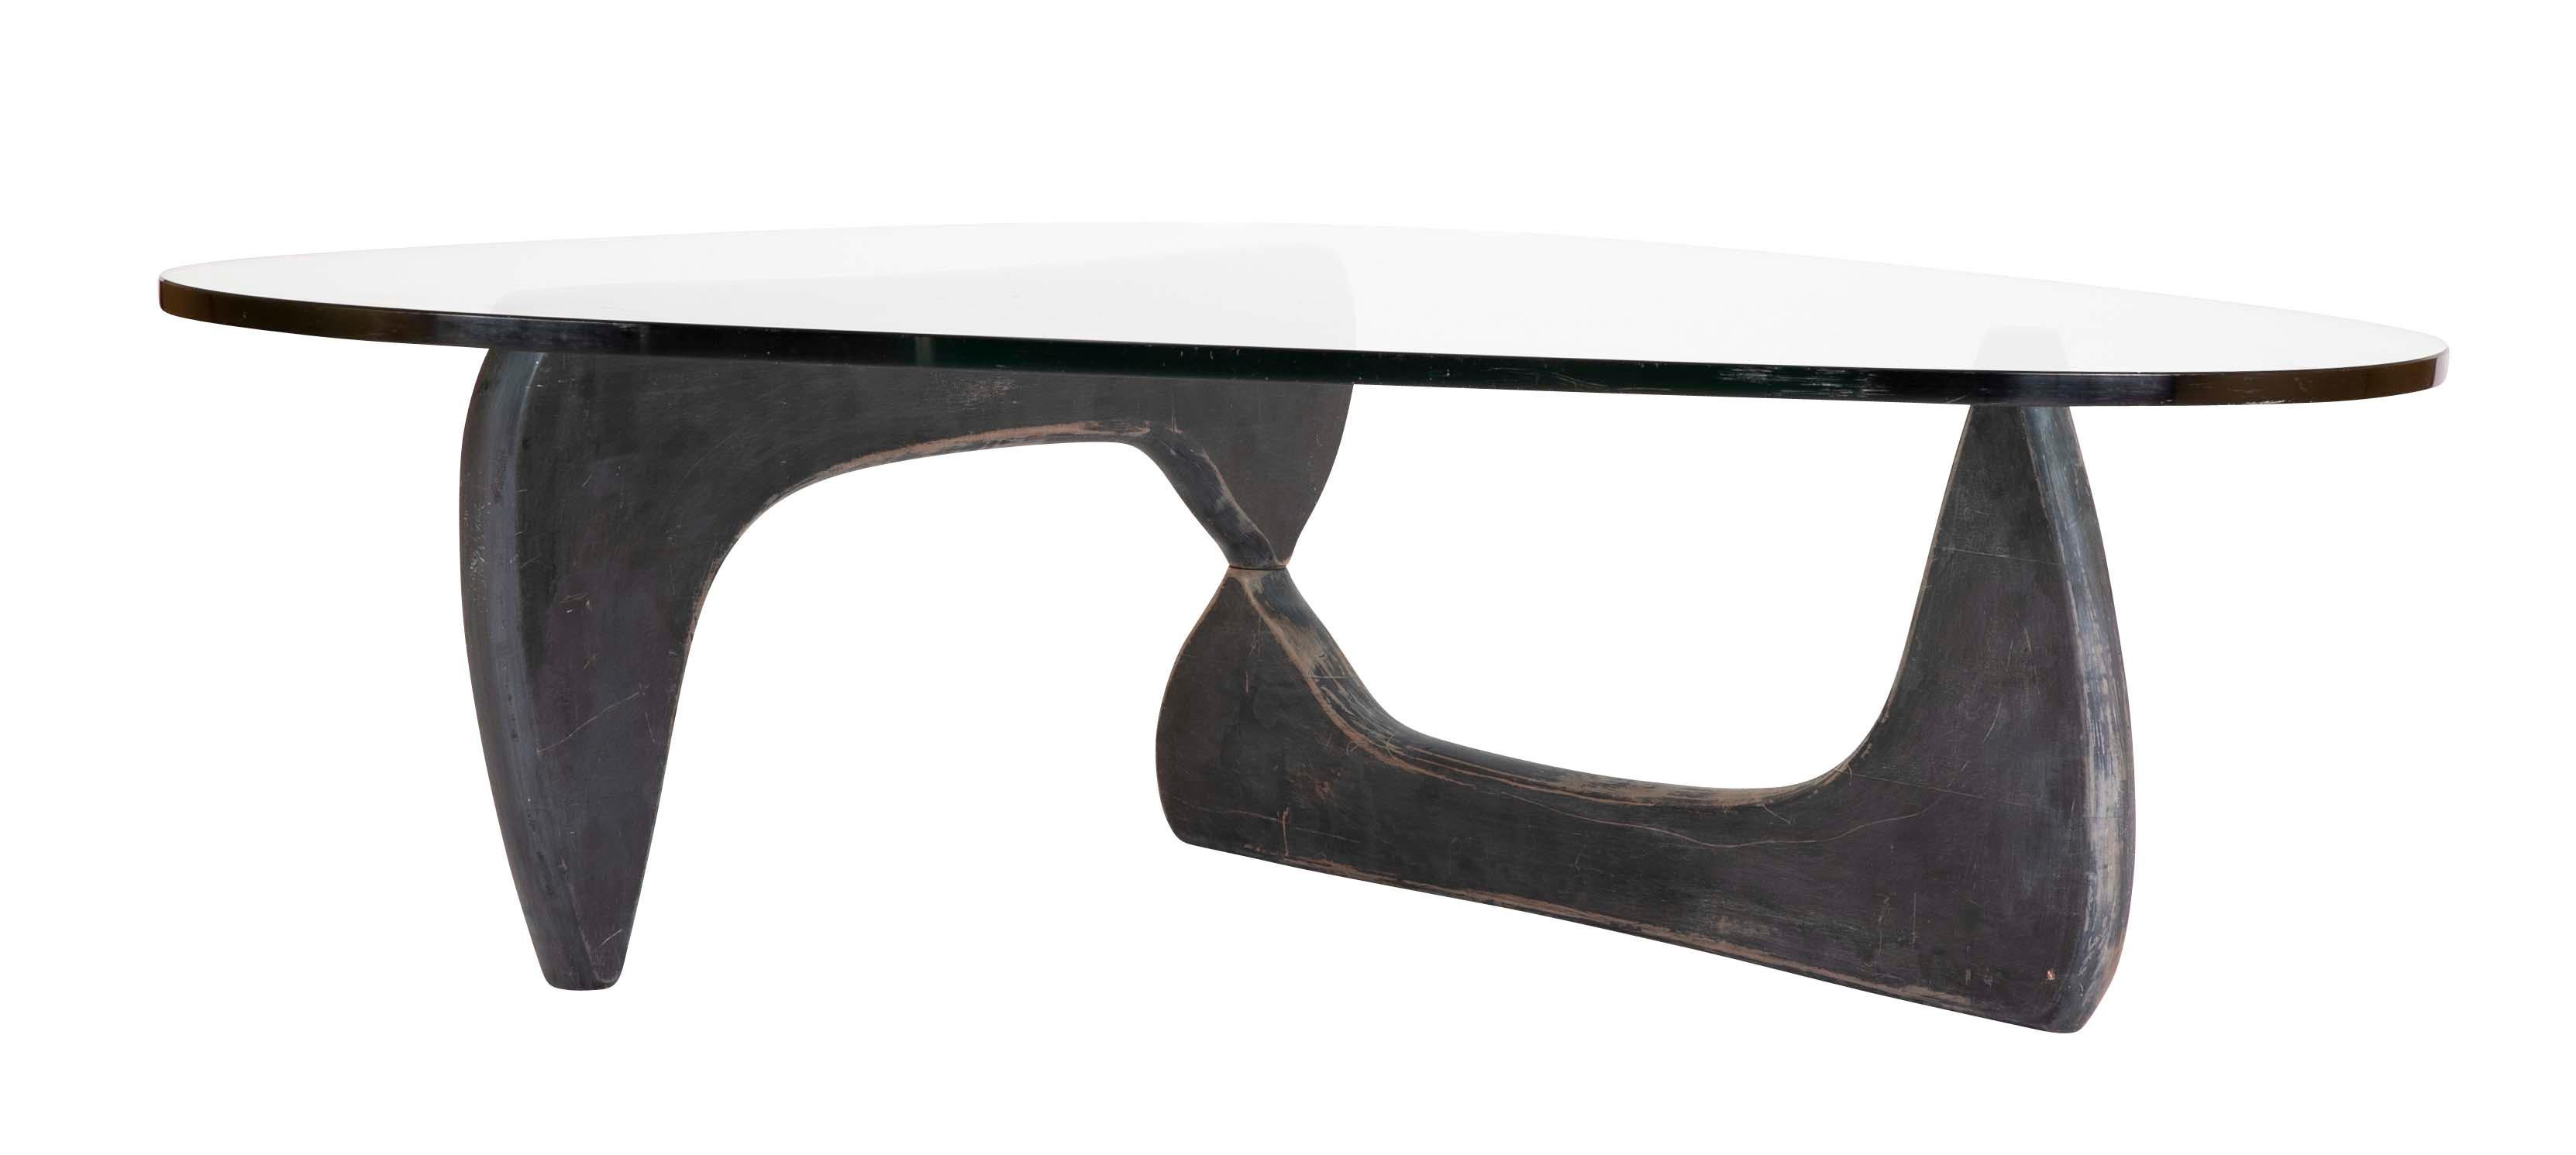 Iconic Isamu Noguchi Herman Miller coffee table with glass top and wood base. The biomorphic form became the epitome of Mid-Century Modern design. I remember even as a child being impressed by our neighbors Noguchi table, and coveting it!
In 